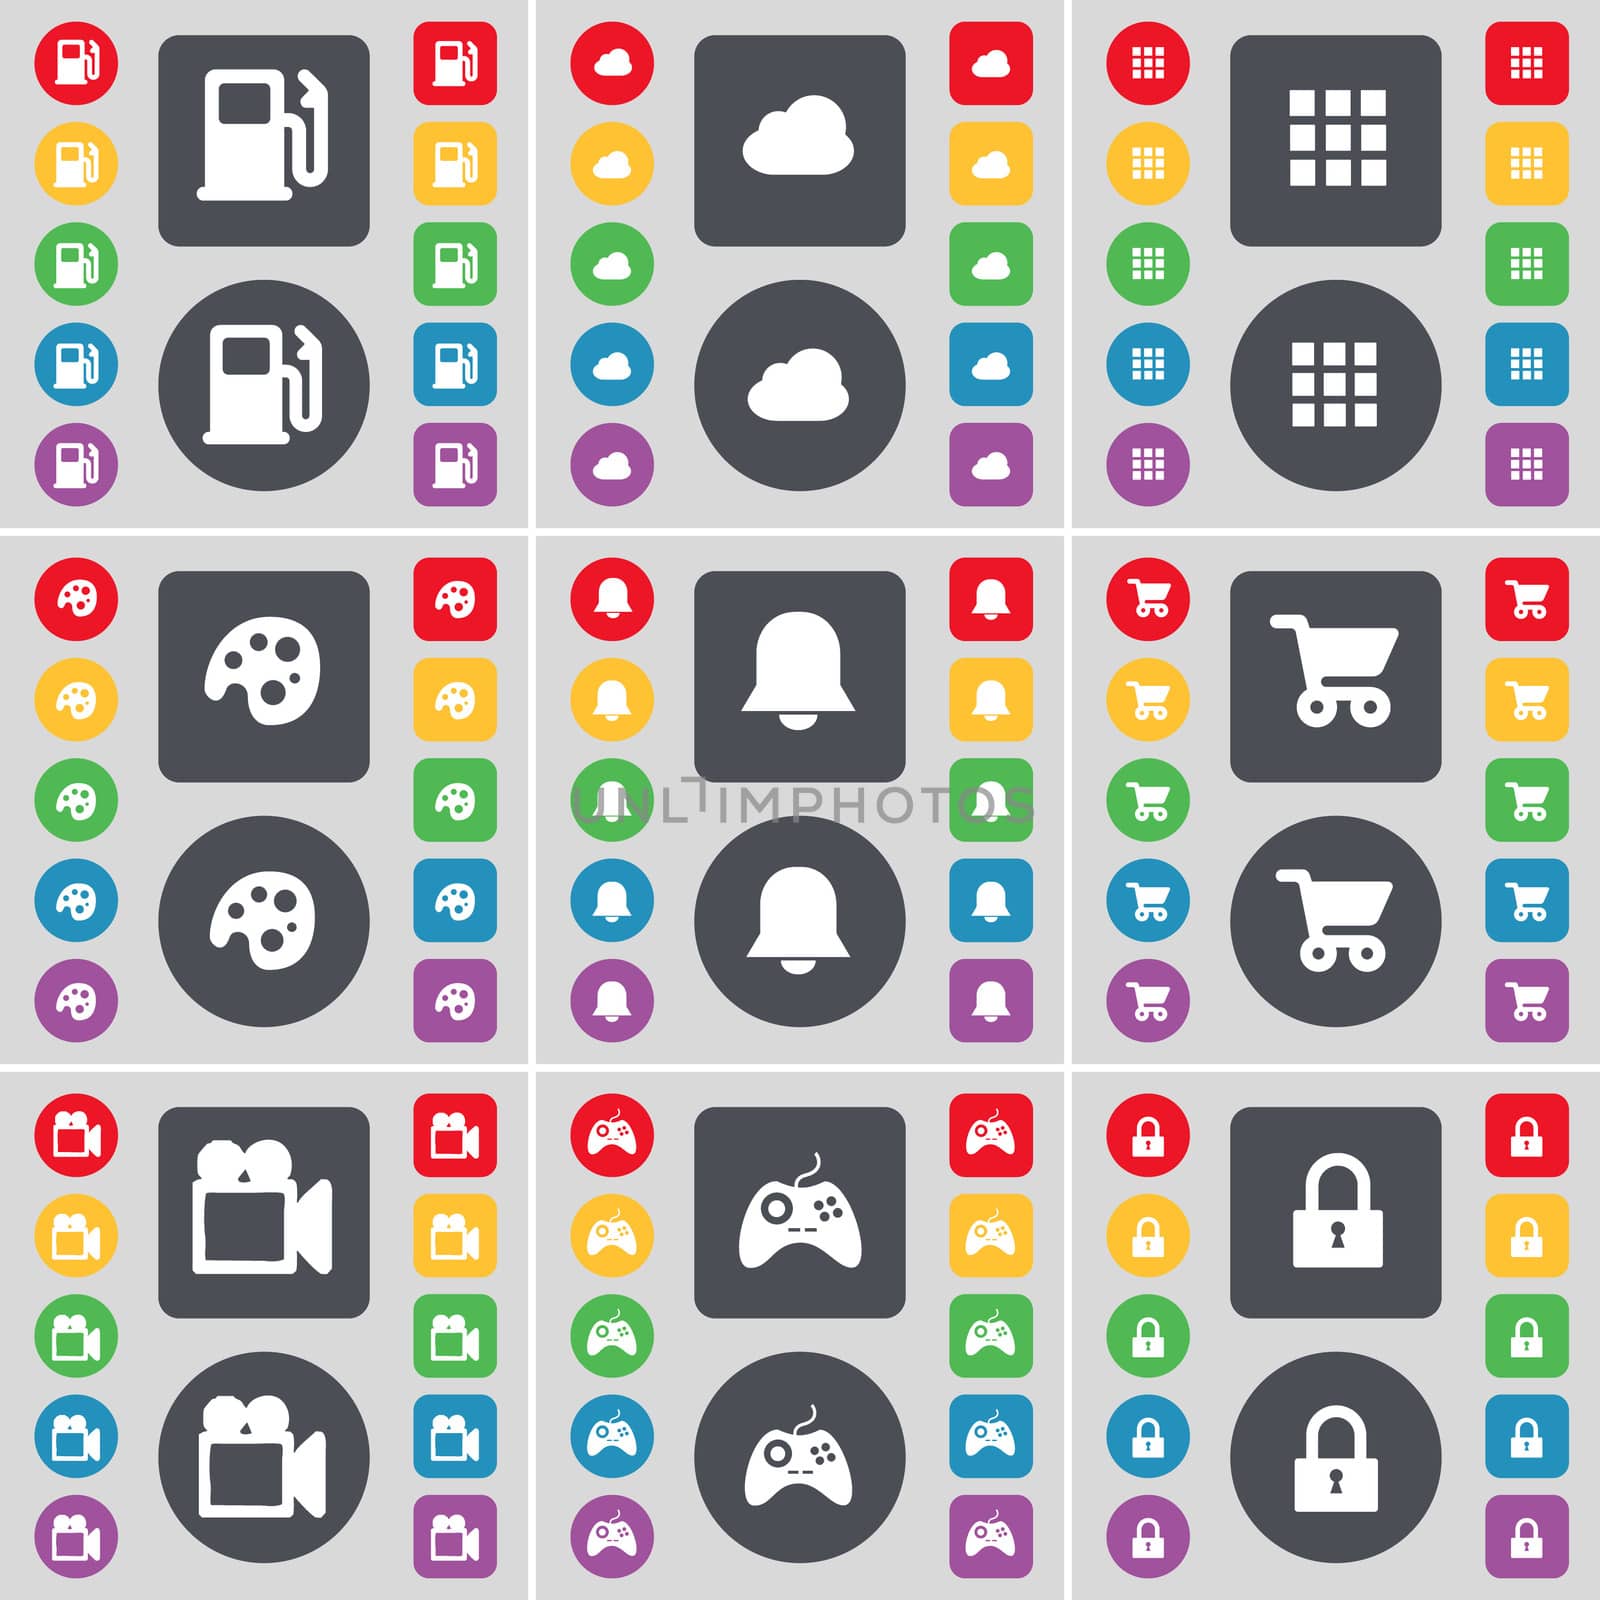 Gas station, Cloud, Apps, Palette, Notification, Shopping cart, Film camera, Gamepad, Lock icon symbol. A large set of flat, colored buttons for your design. illustration